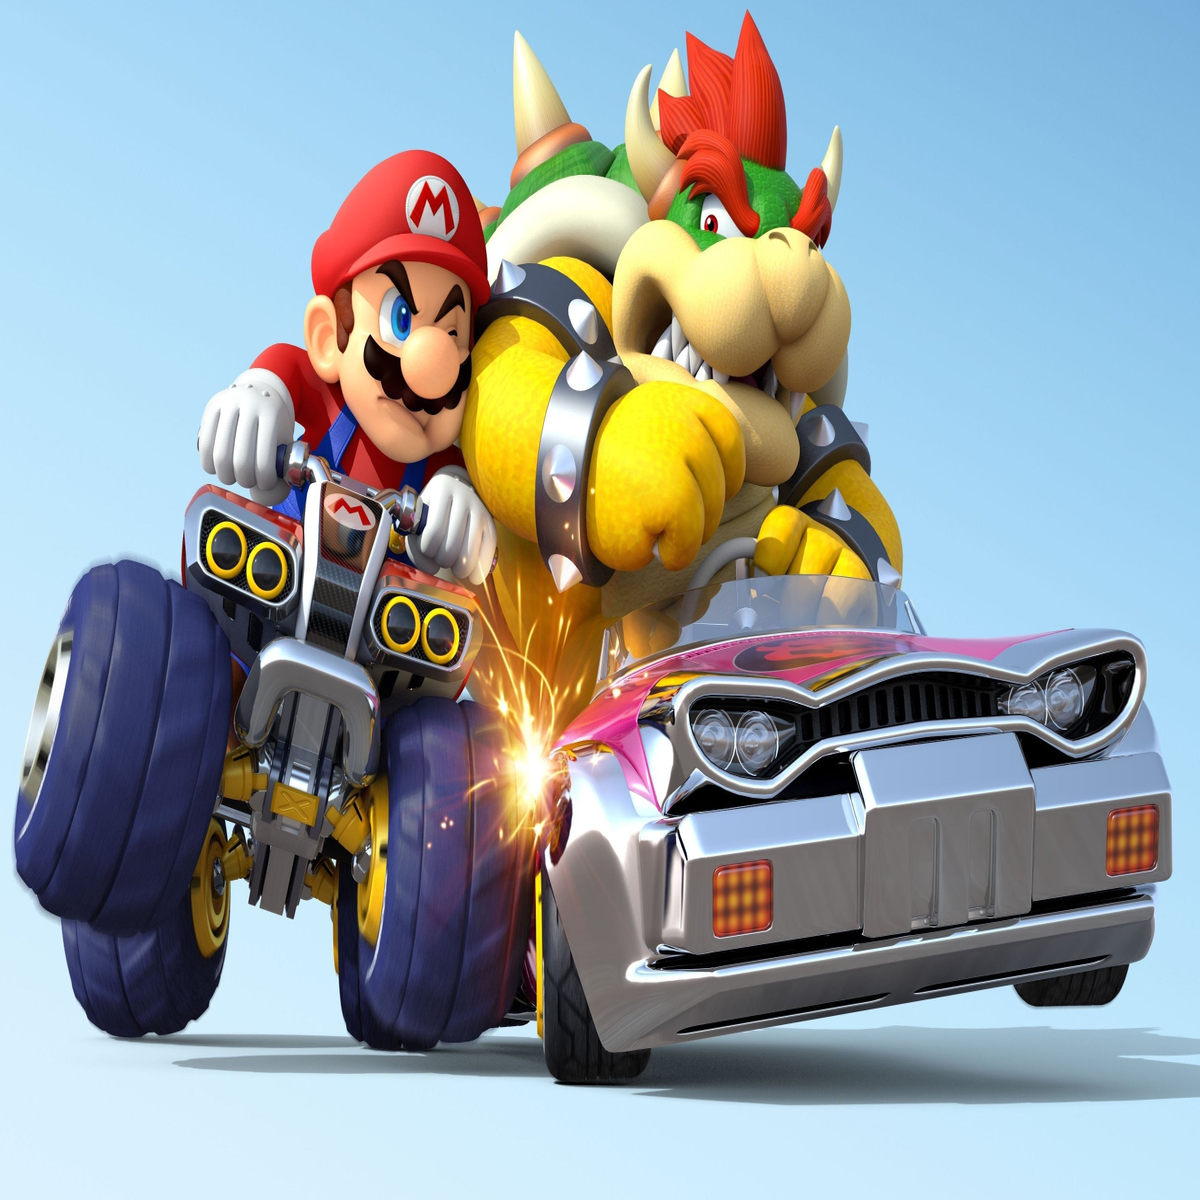 Hell freezes over: Mario Kart coming to PC claim Nintendo